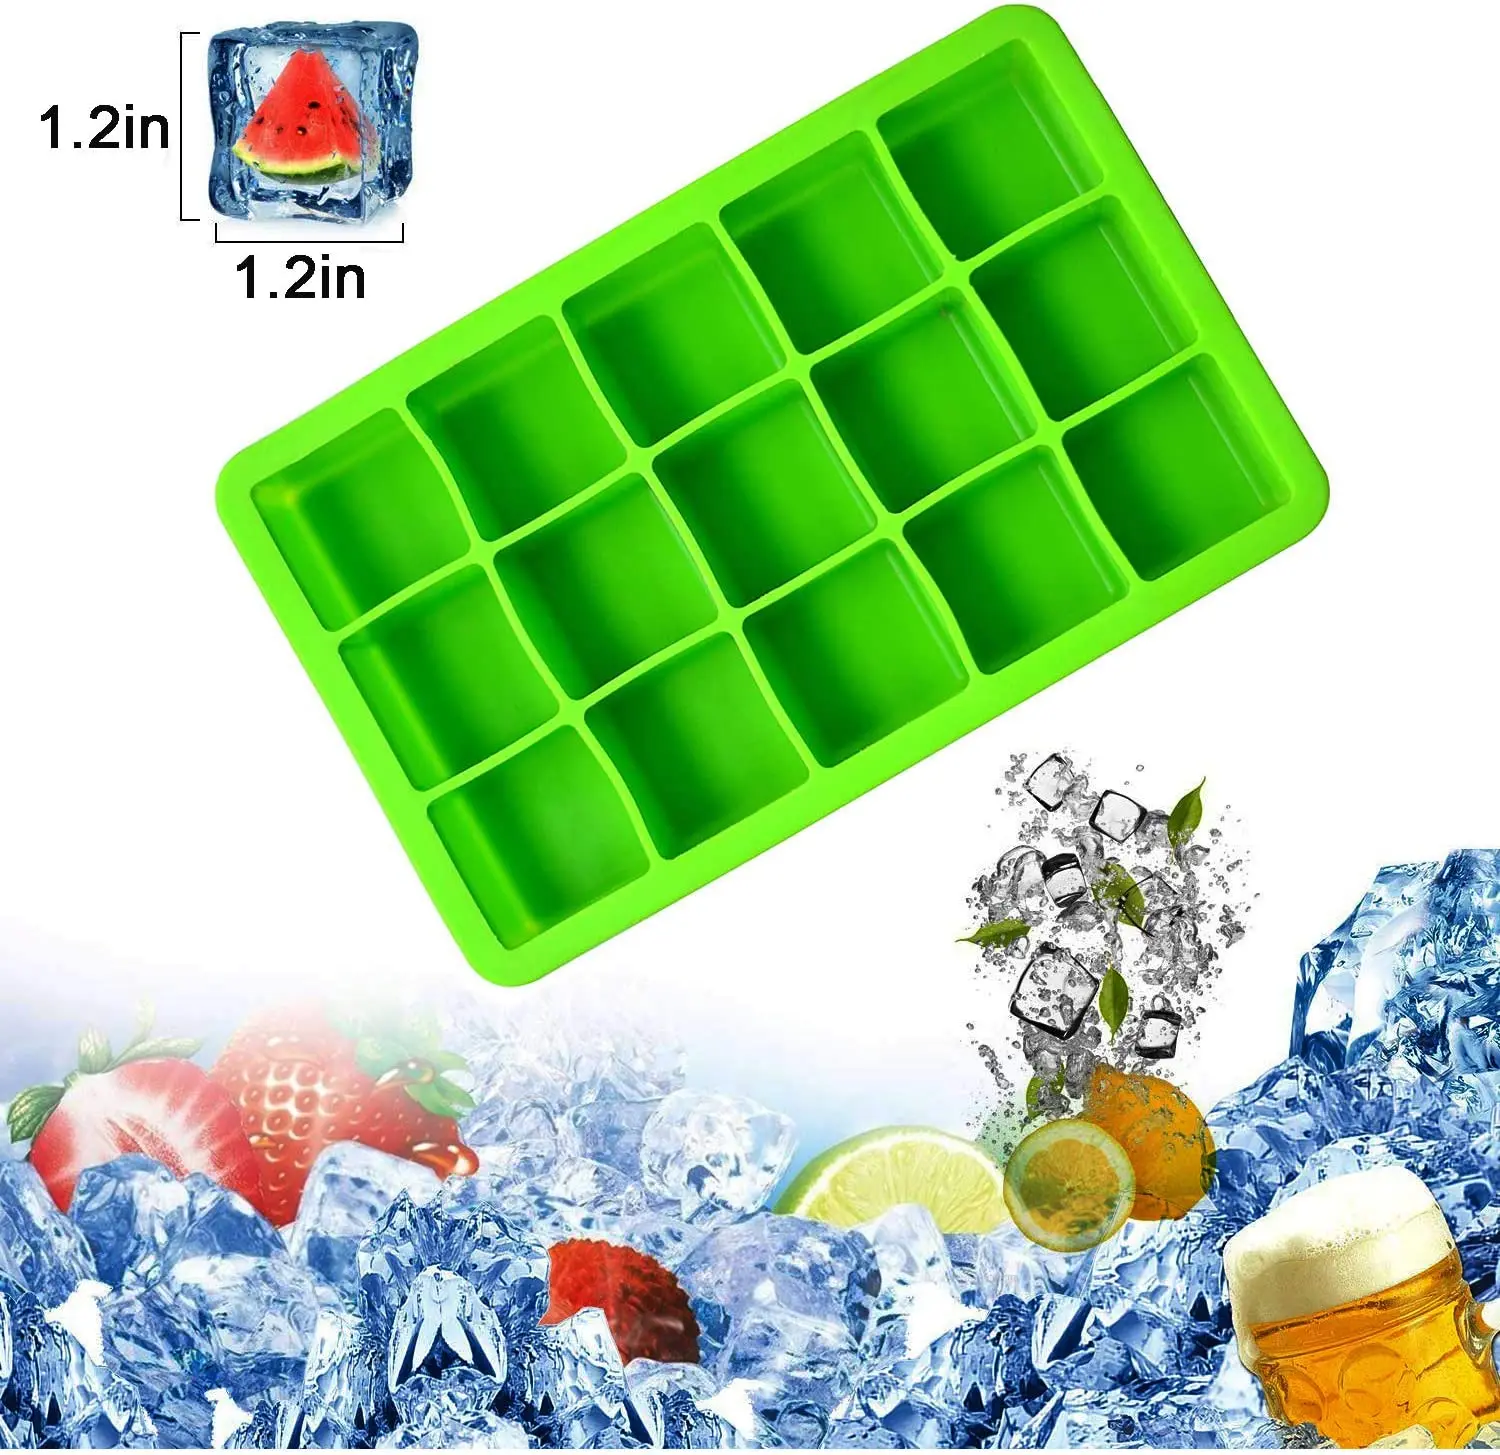 Silicone Ice Tray / Mold - 1.25 Cube - 15 Molds - 1 Count Box